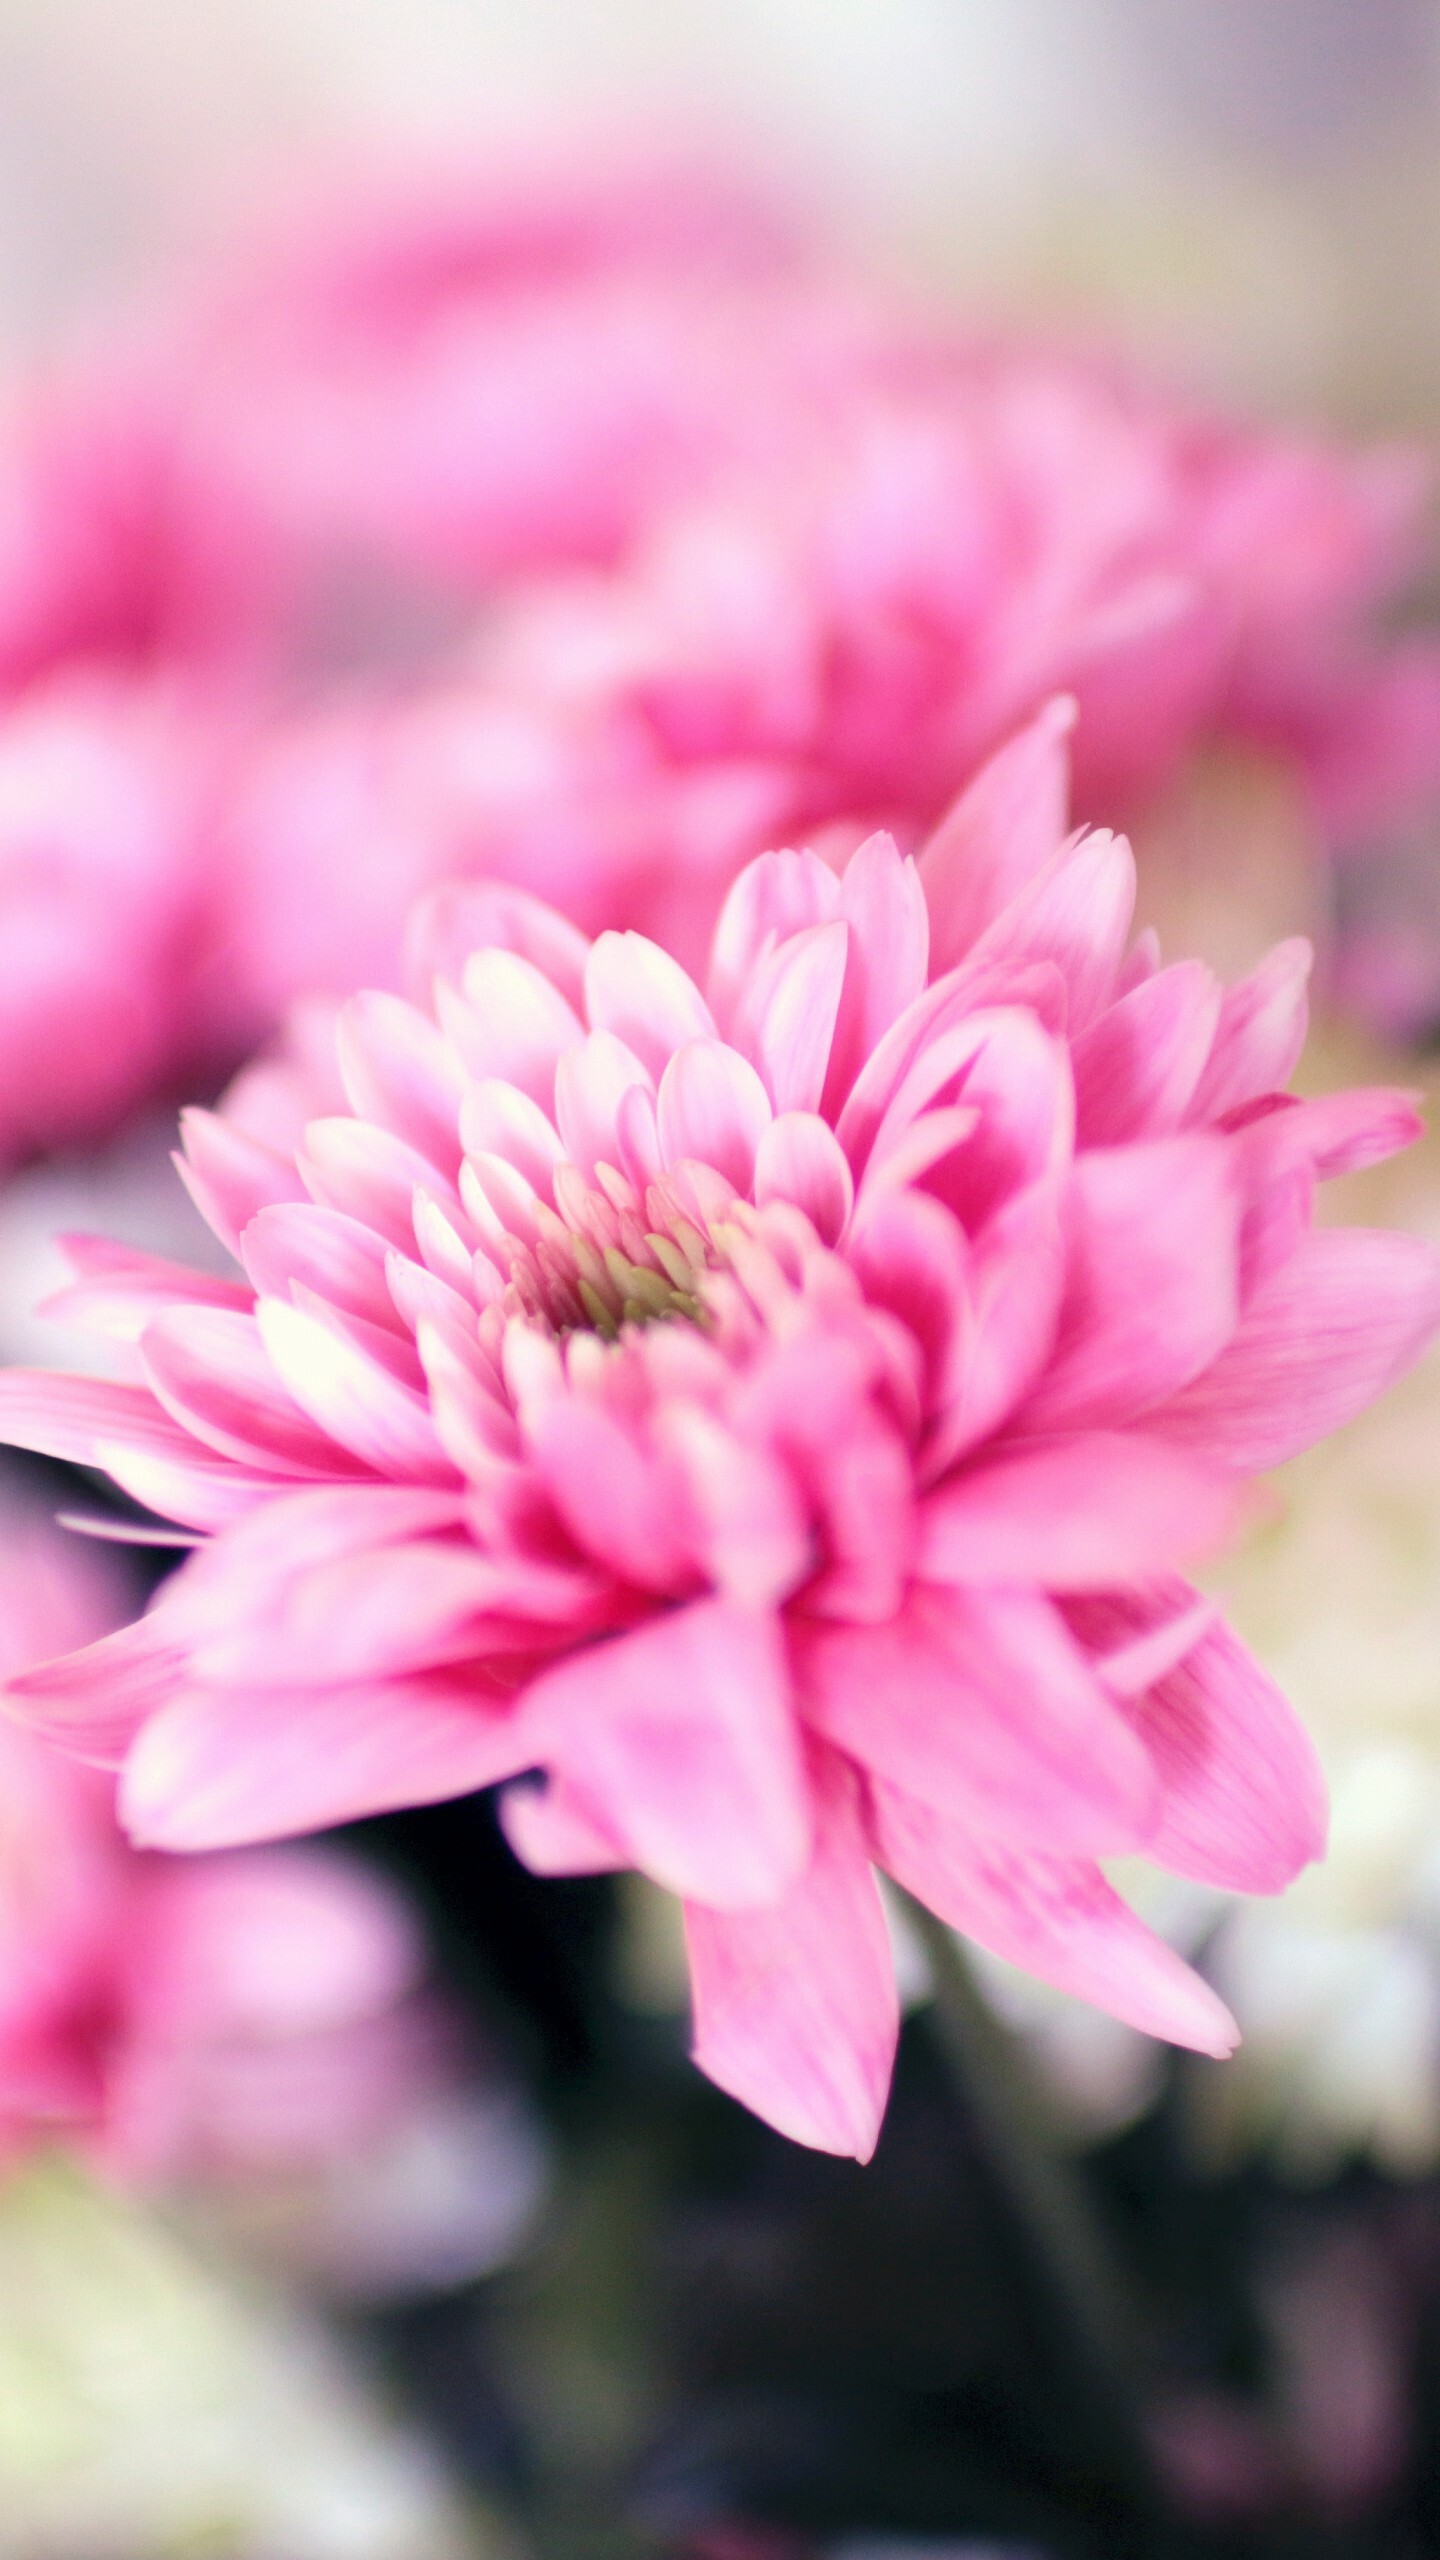 Chrysanthemum: Garden hardy varieties are defined by their ability to produce an abundance of small blooms with little if any mechanical assistance, such as staking and withstanding wind and rain. 1440x2560 HD Wallpaper.